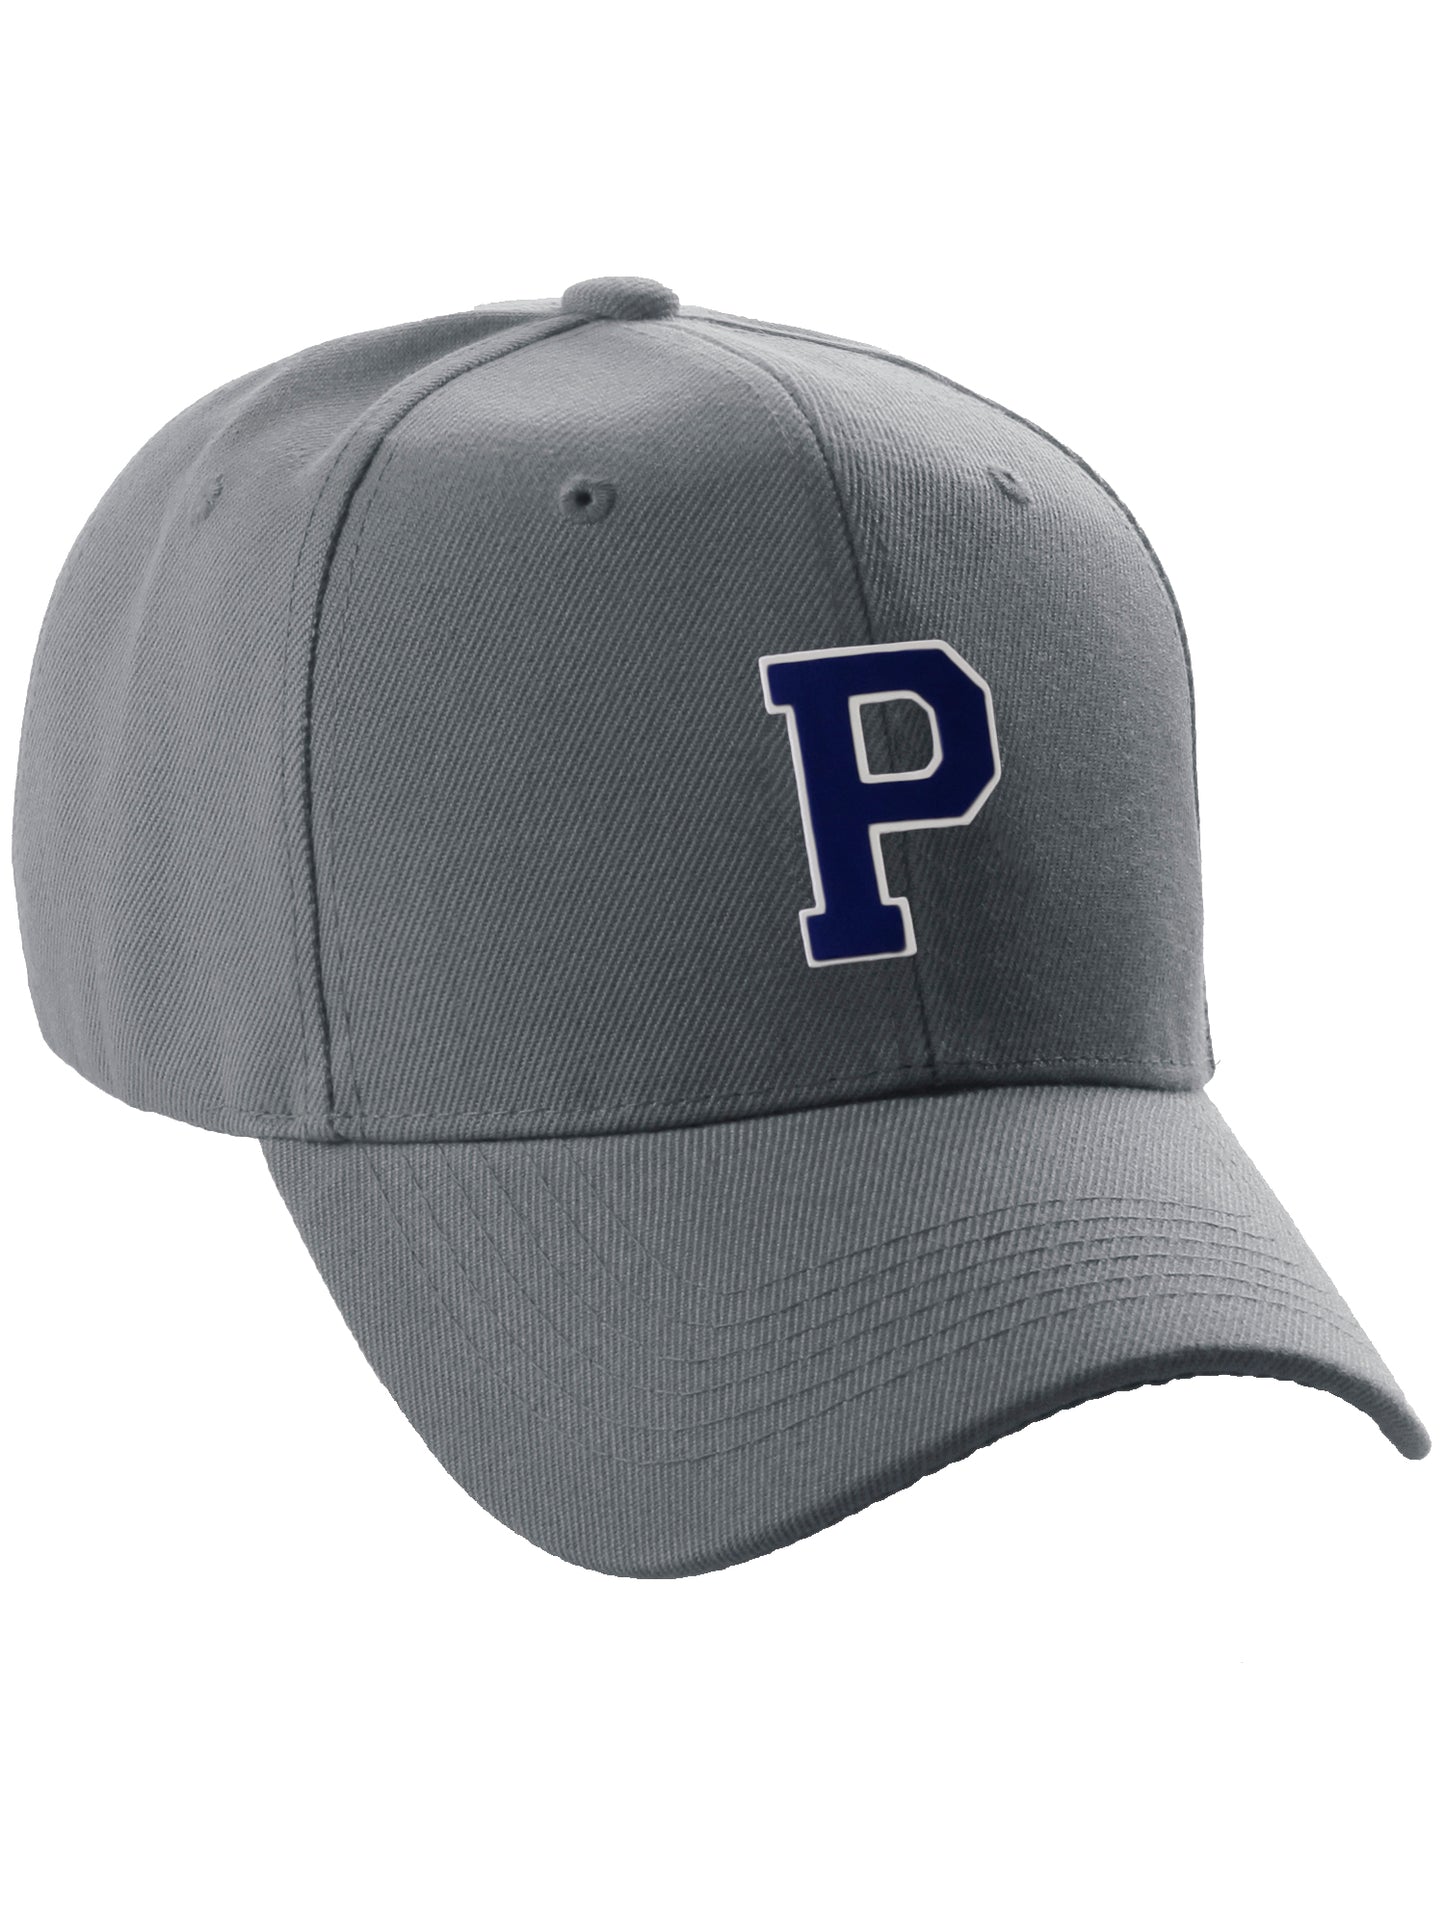 Classic Baseball Hat Custom A to Z Initial Team Letter, Charcoal Cap White Blue